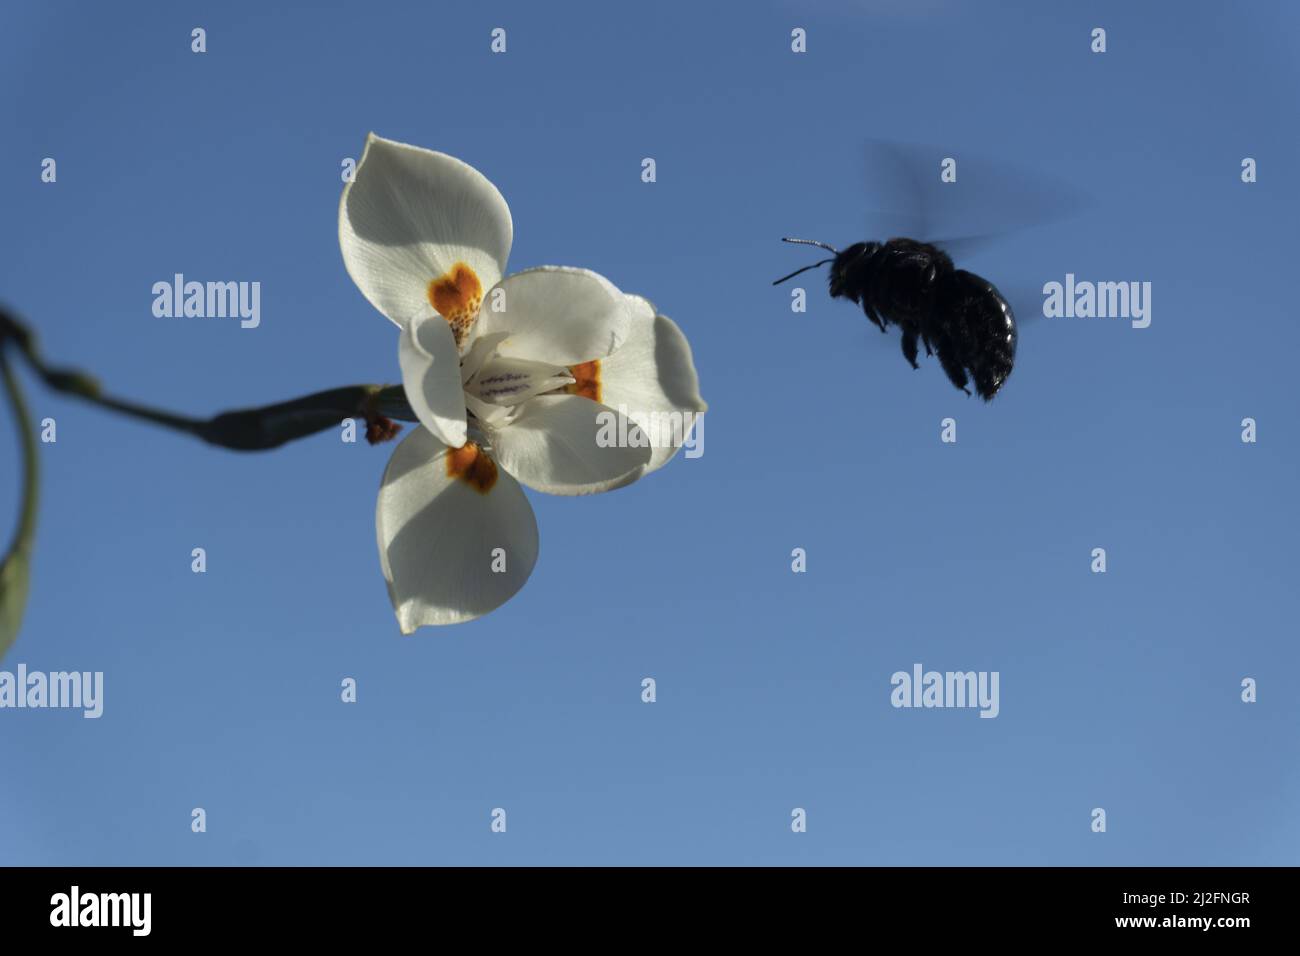 A macro view of a white iris flower and a bee approaching it against the sky background Stock Photo